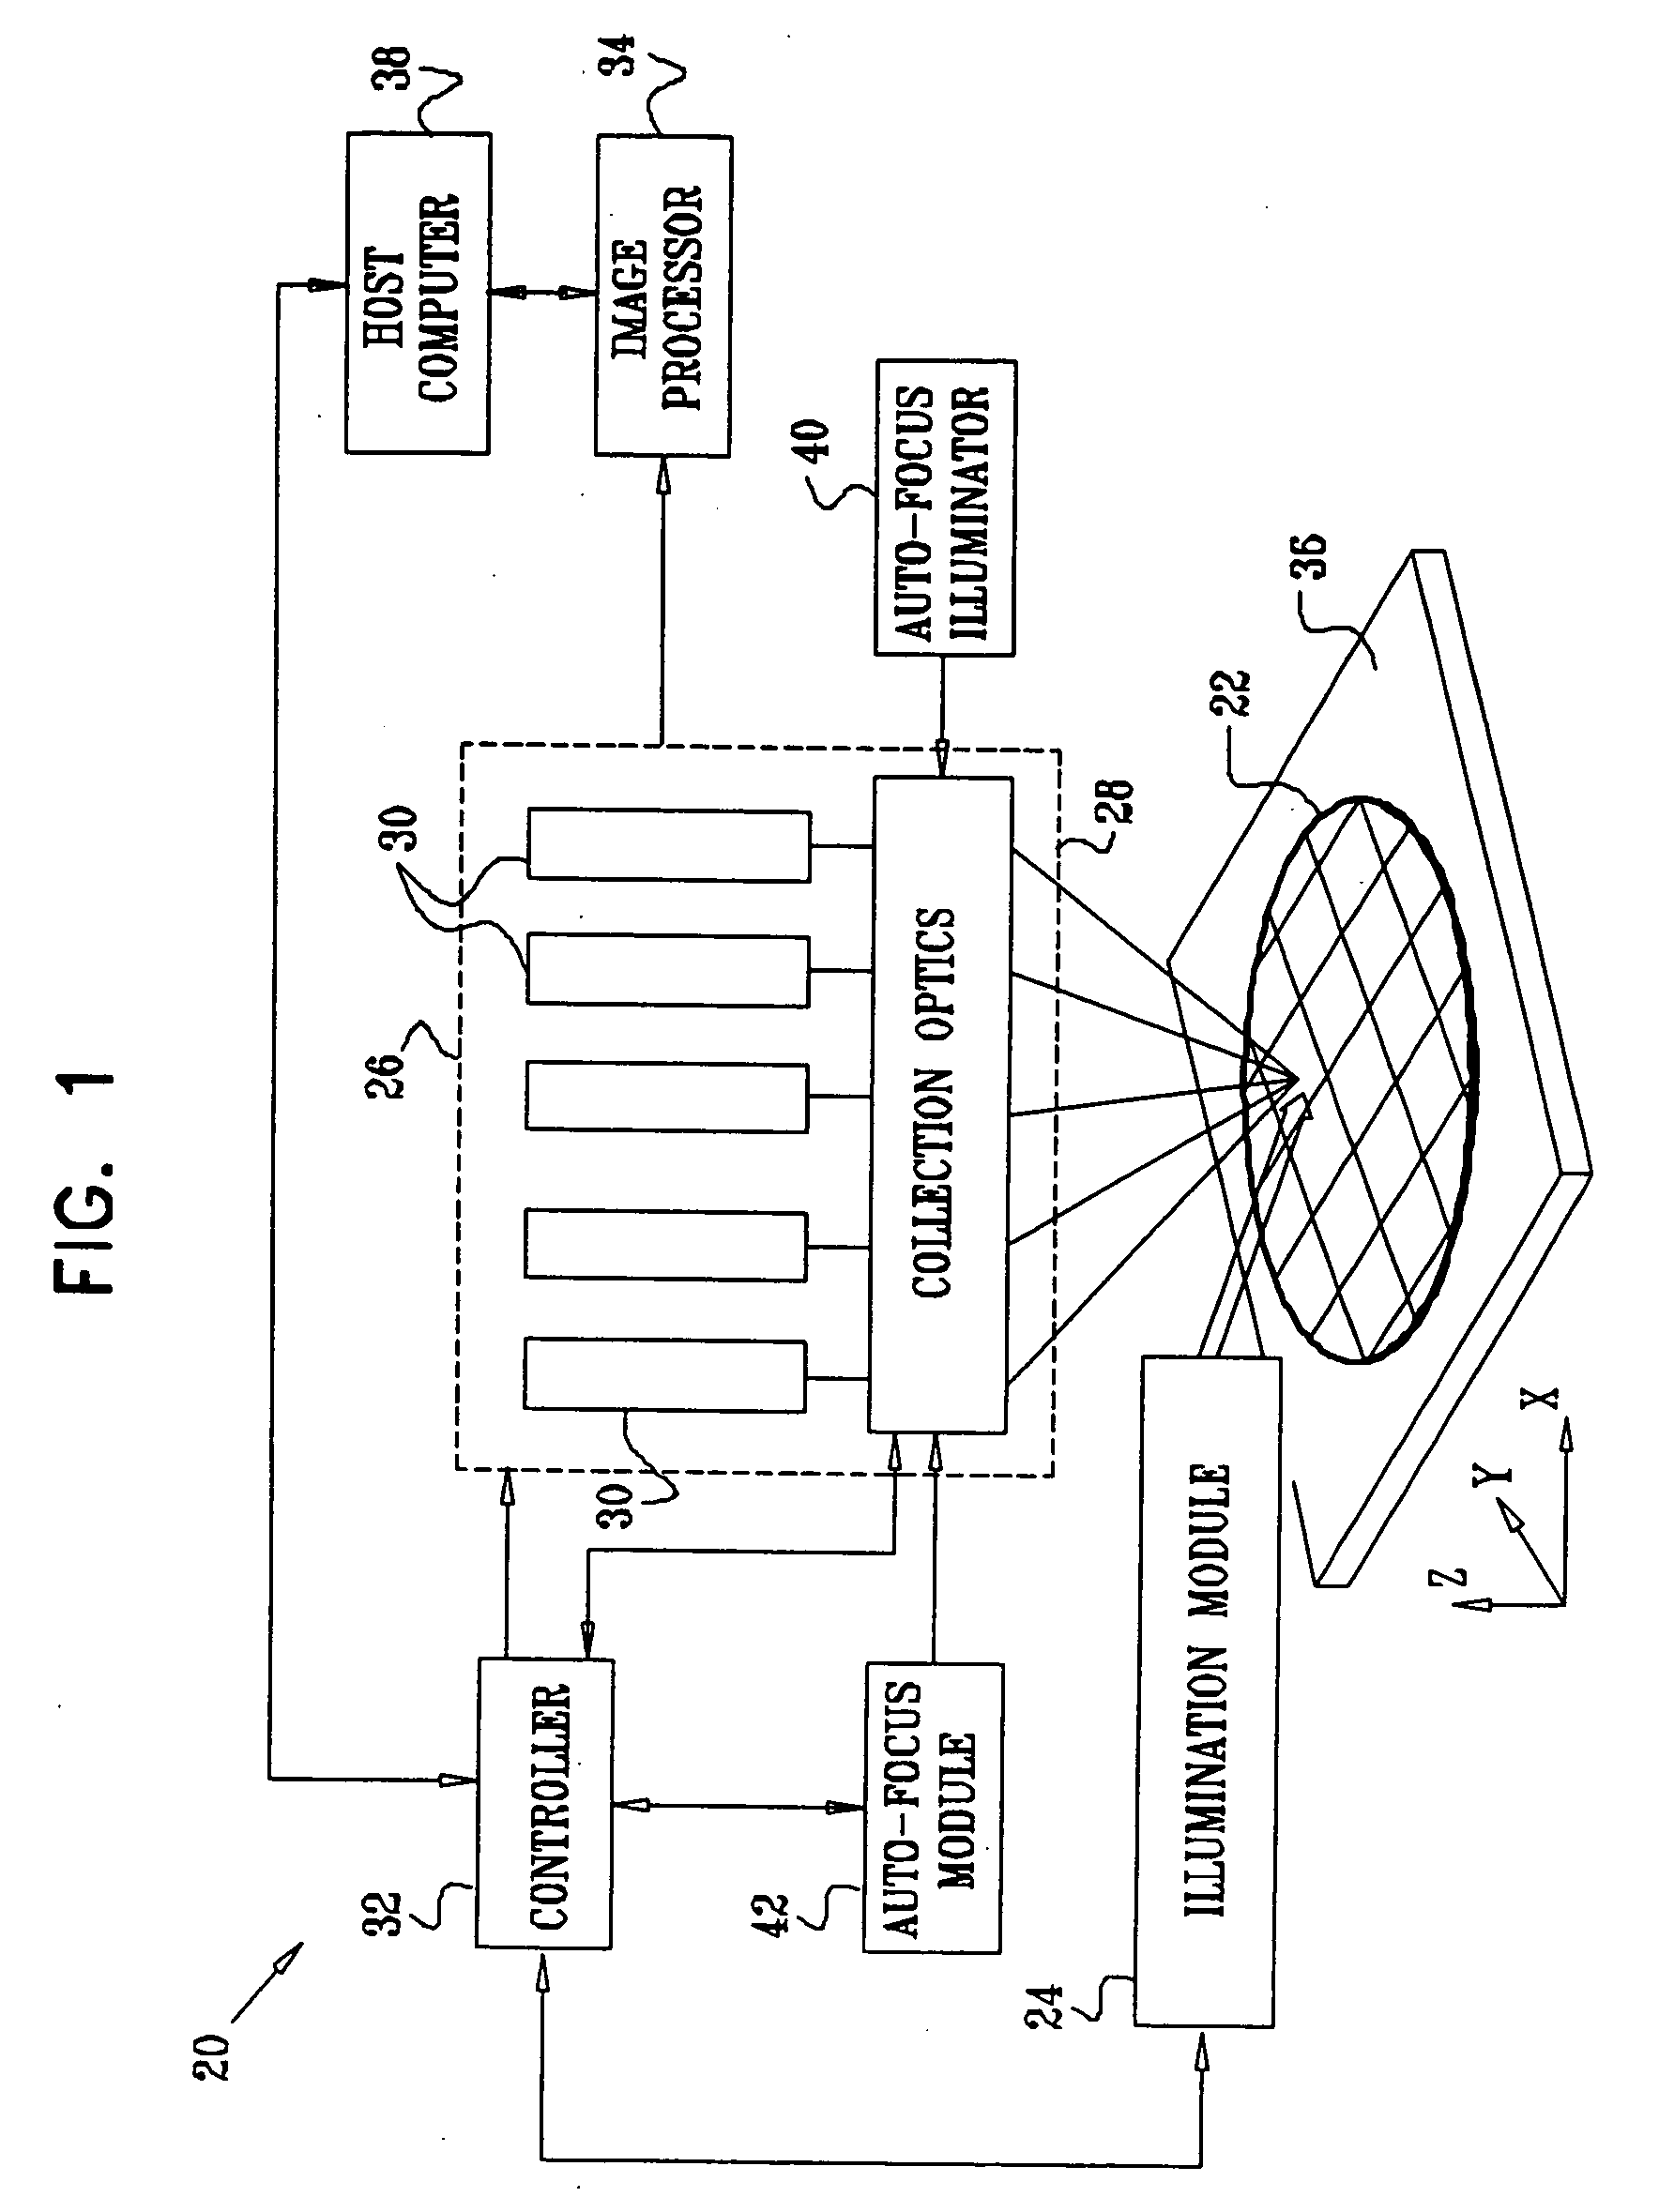 Inspection system with oblique viewing angle